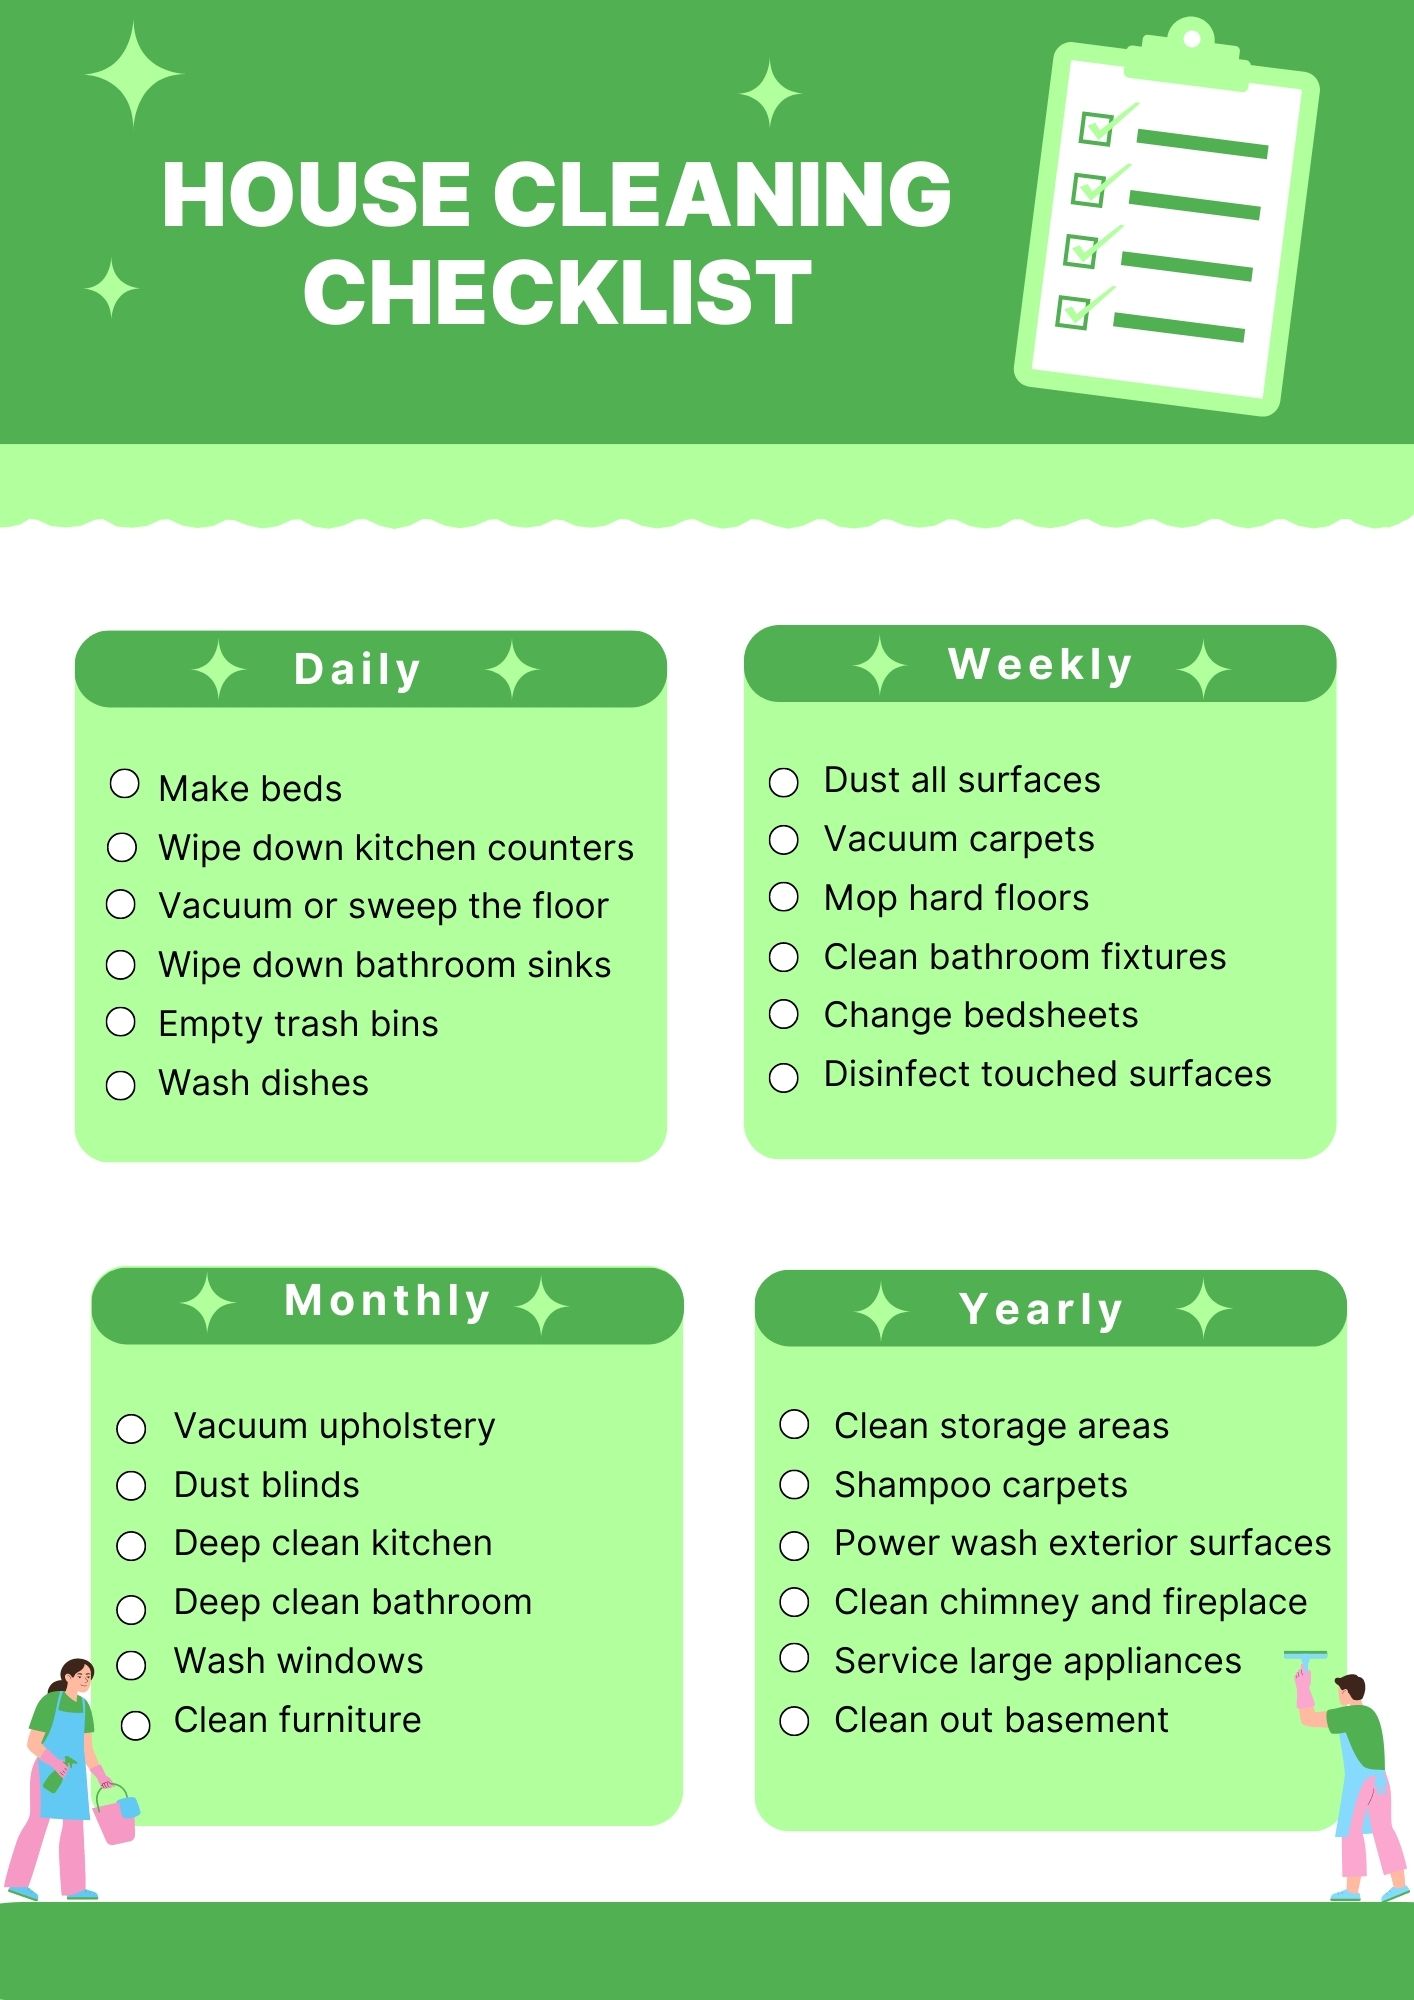 How to Make House Cleaning Schedule and Checklist